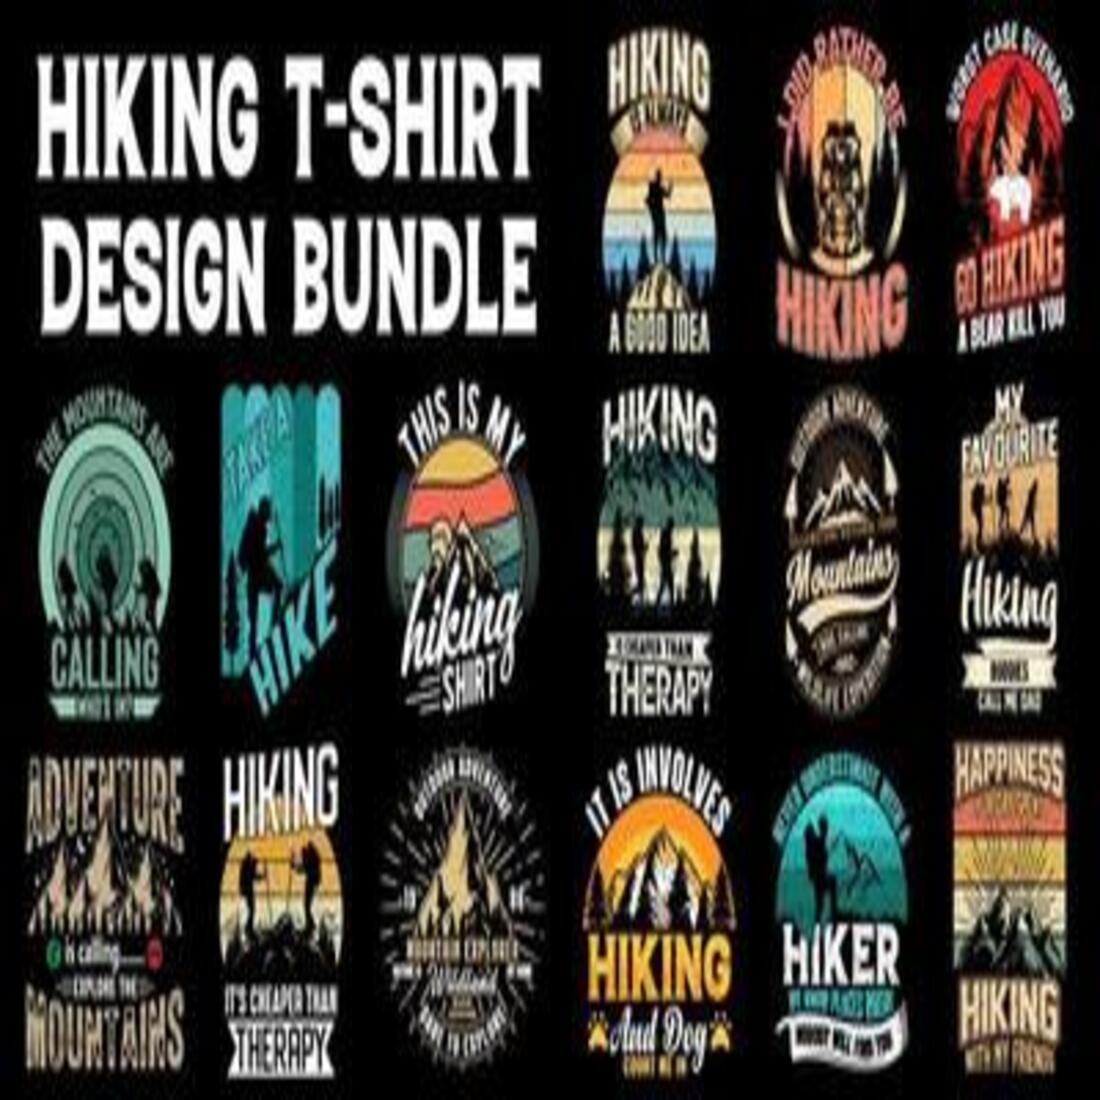 6 T-SHIRT DESIGNS IN $7 cover image.